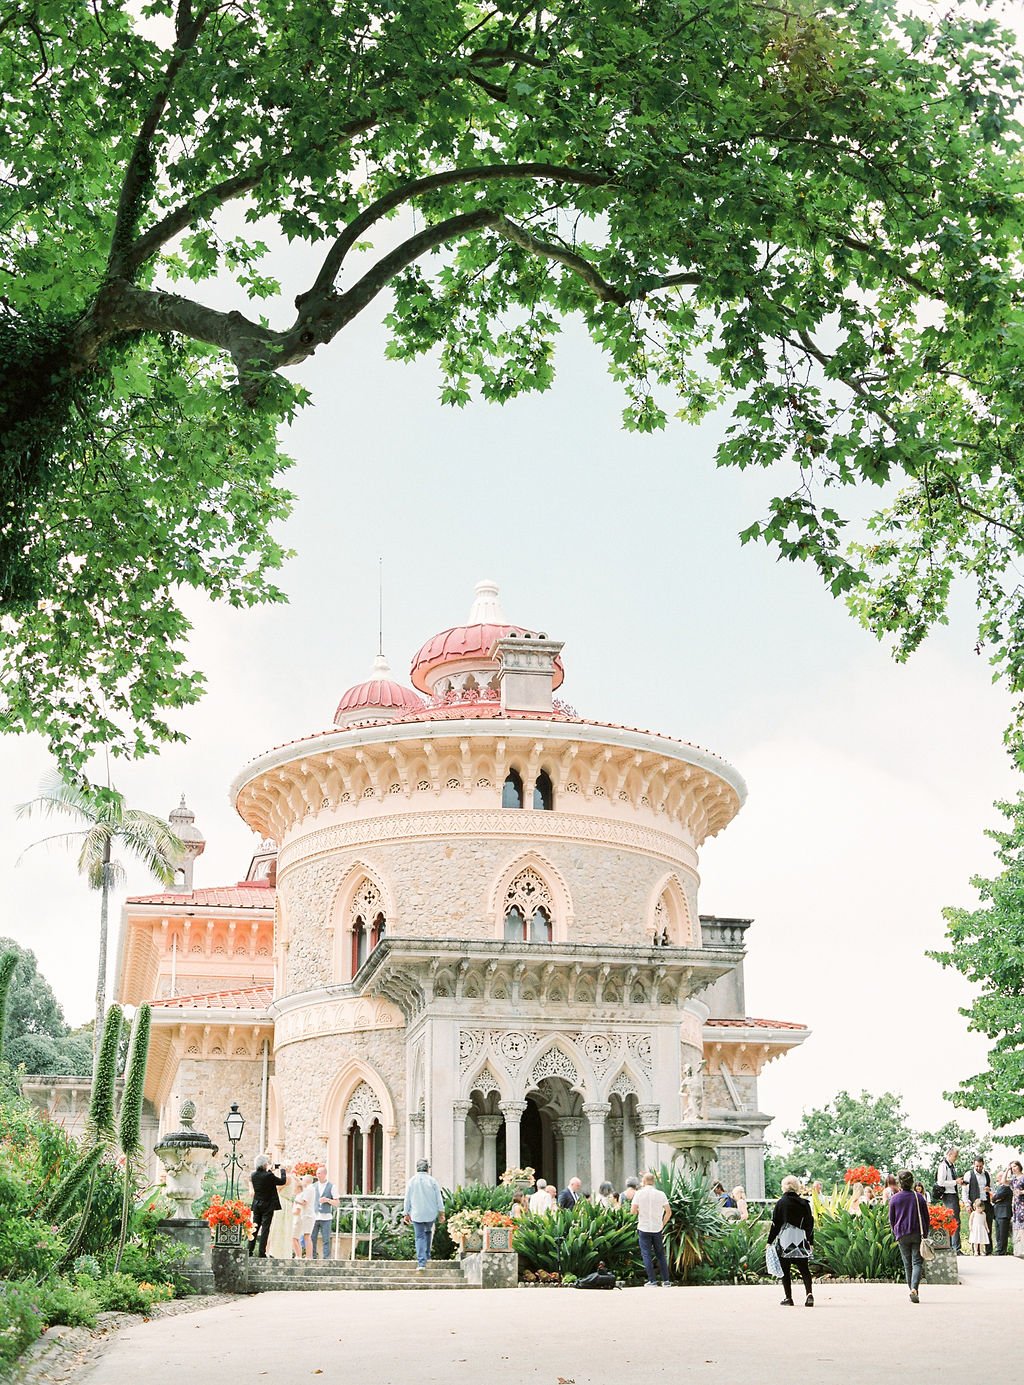 Beautiful image with the full view of Palácio de Monserrate framed by green trees